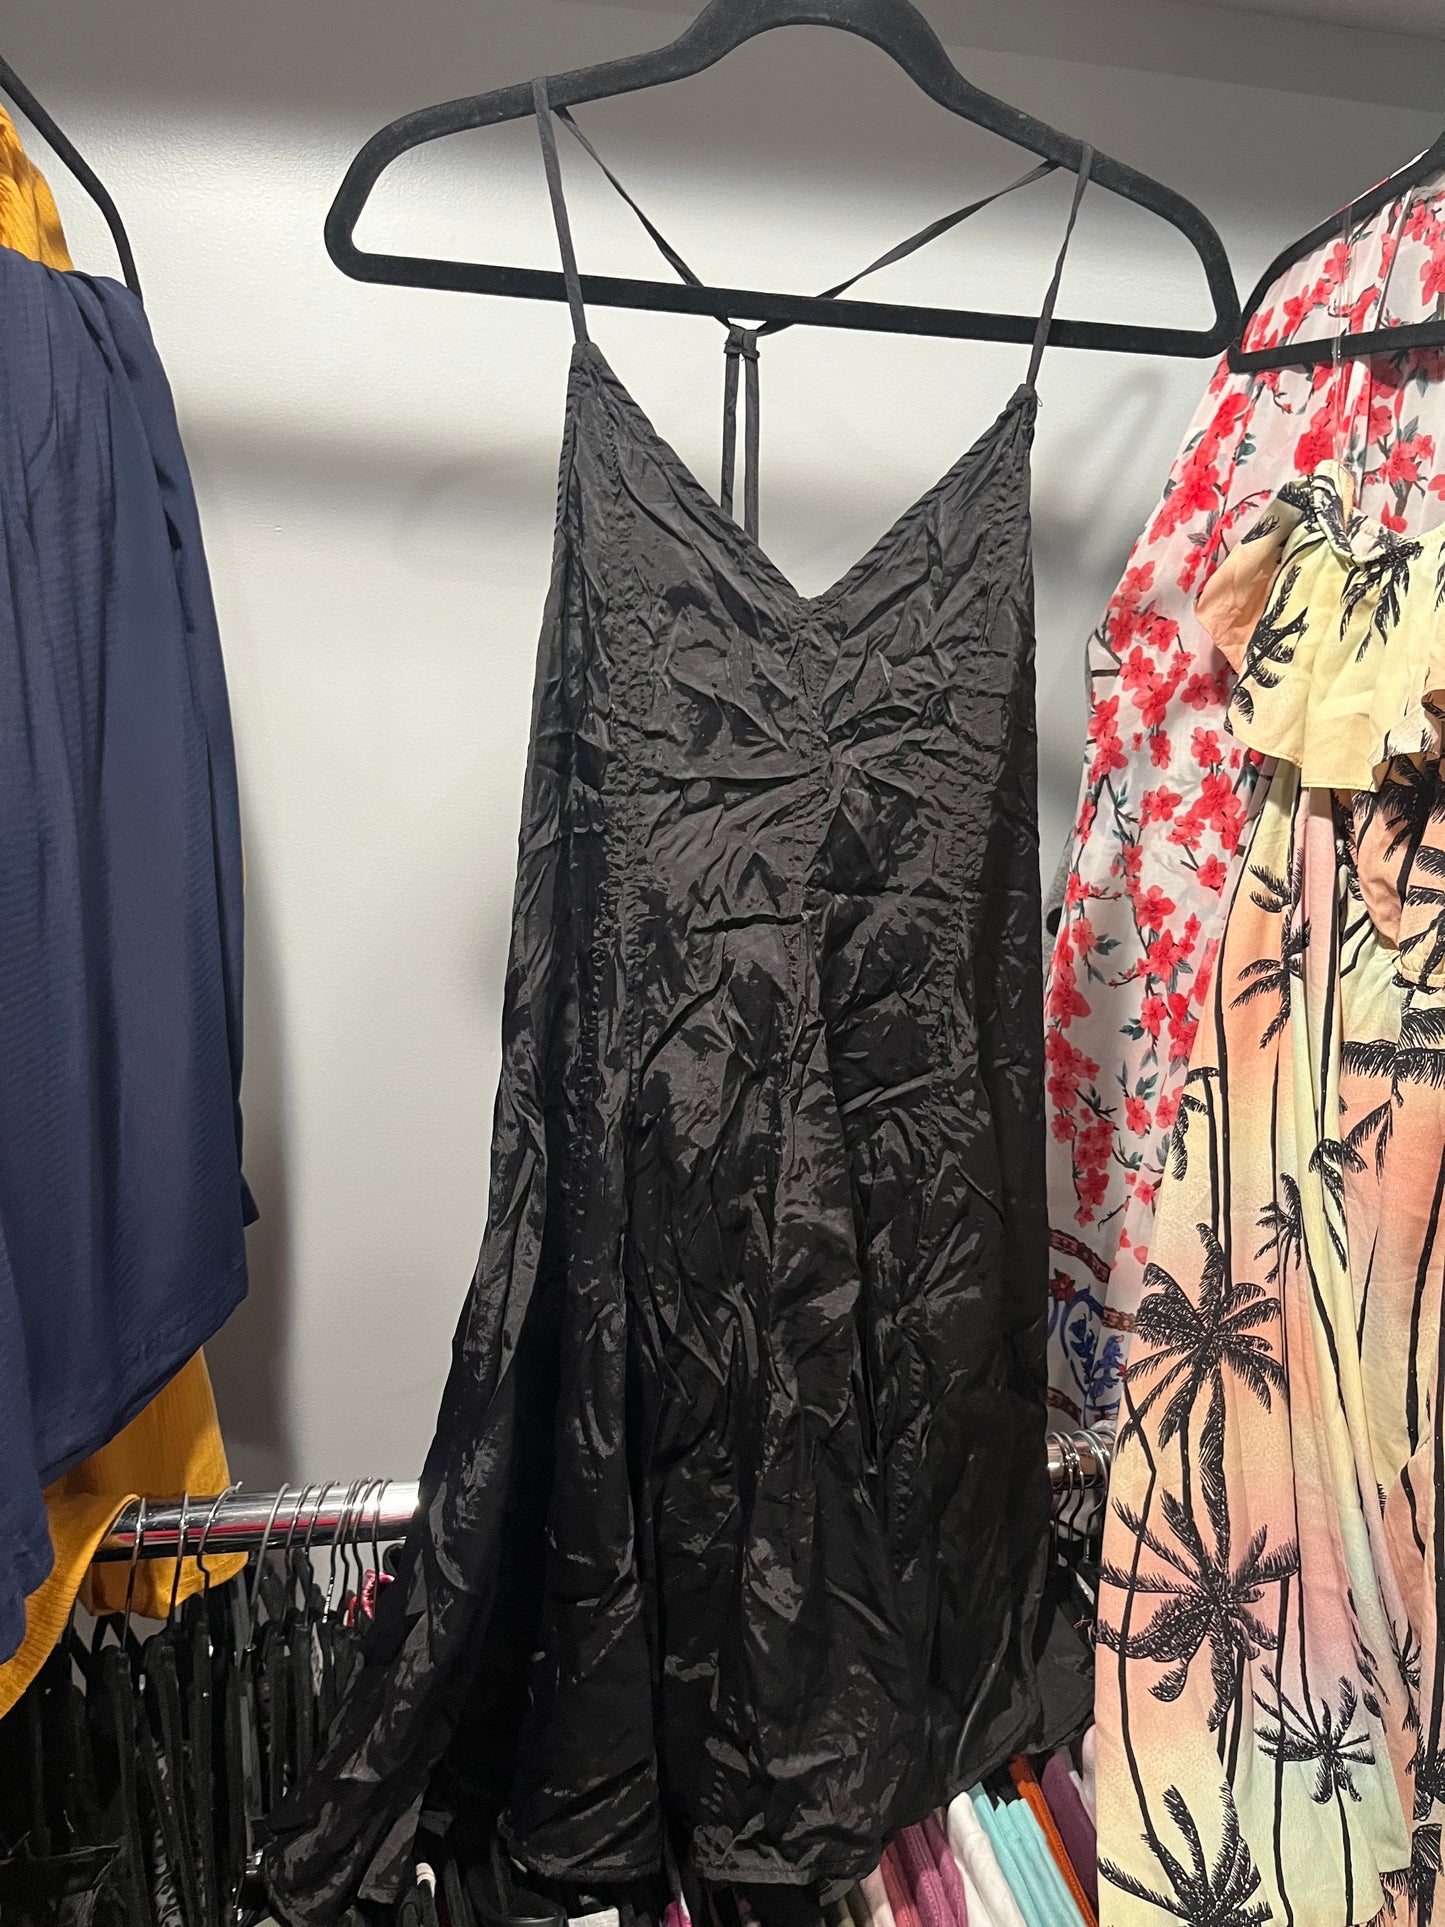 Medium dresses, rompers and bottoms- final sale